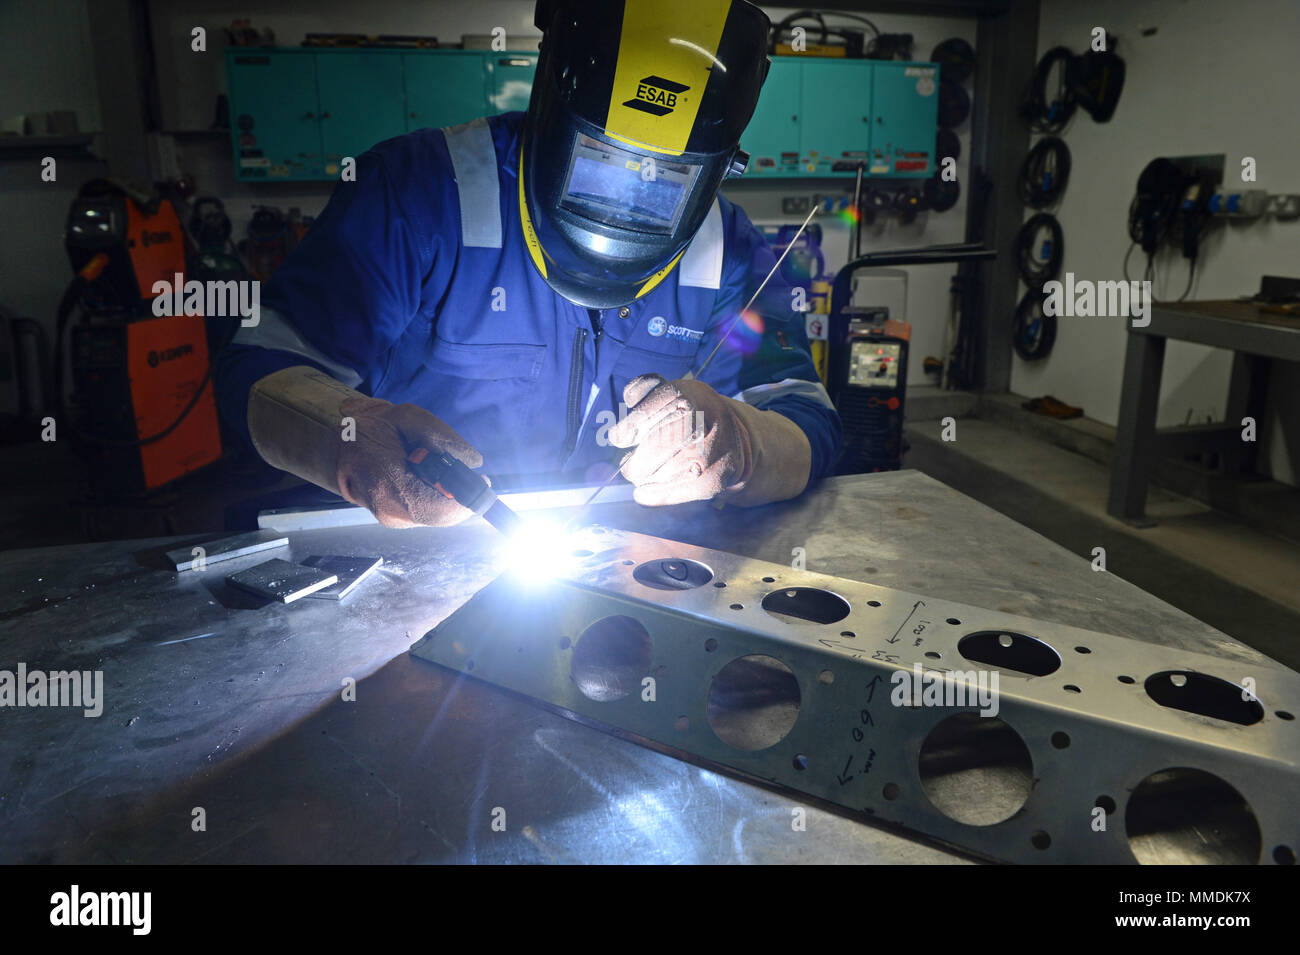 Welder welding together some stainless steel with a mig welder Stock Photo